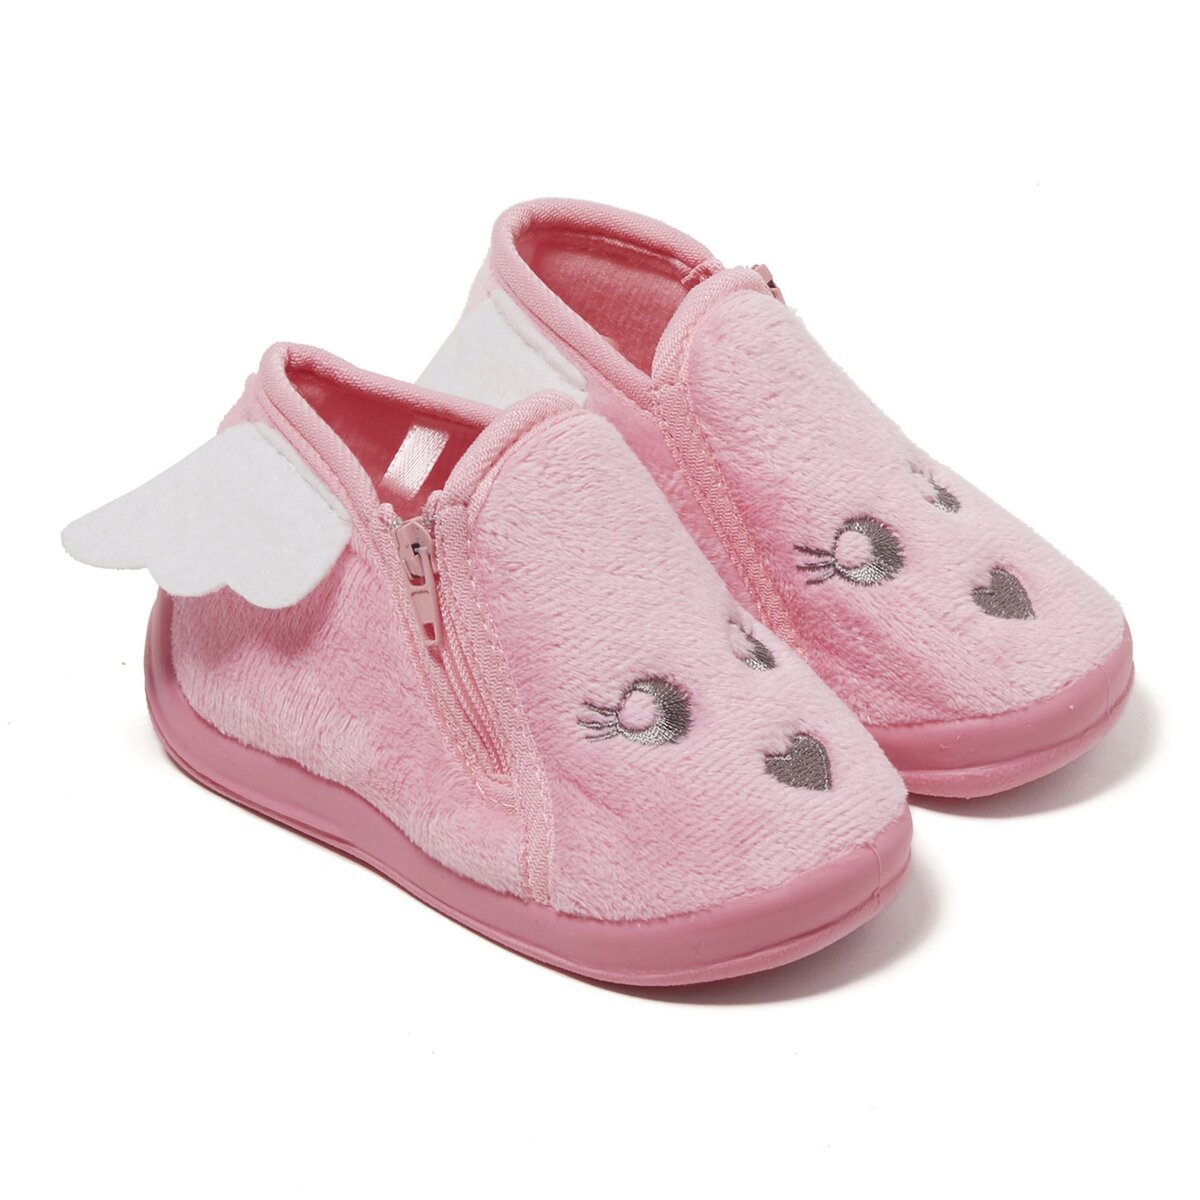 IN EXTENSO Chaussons velours animaux bébé fille